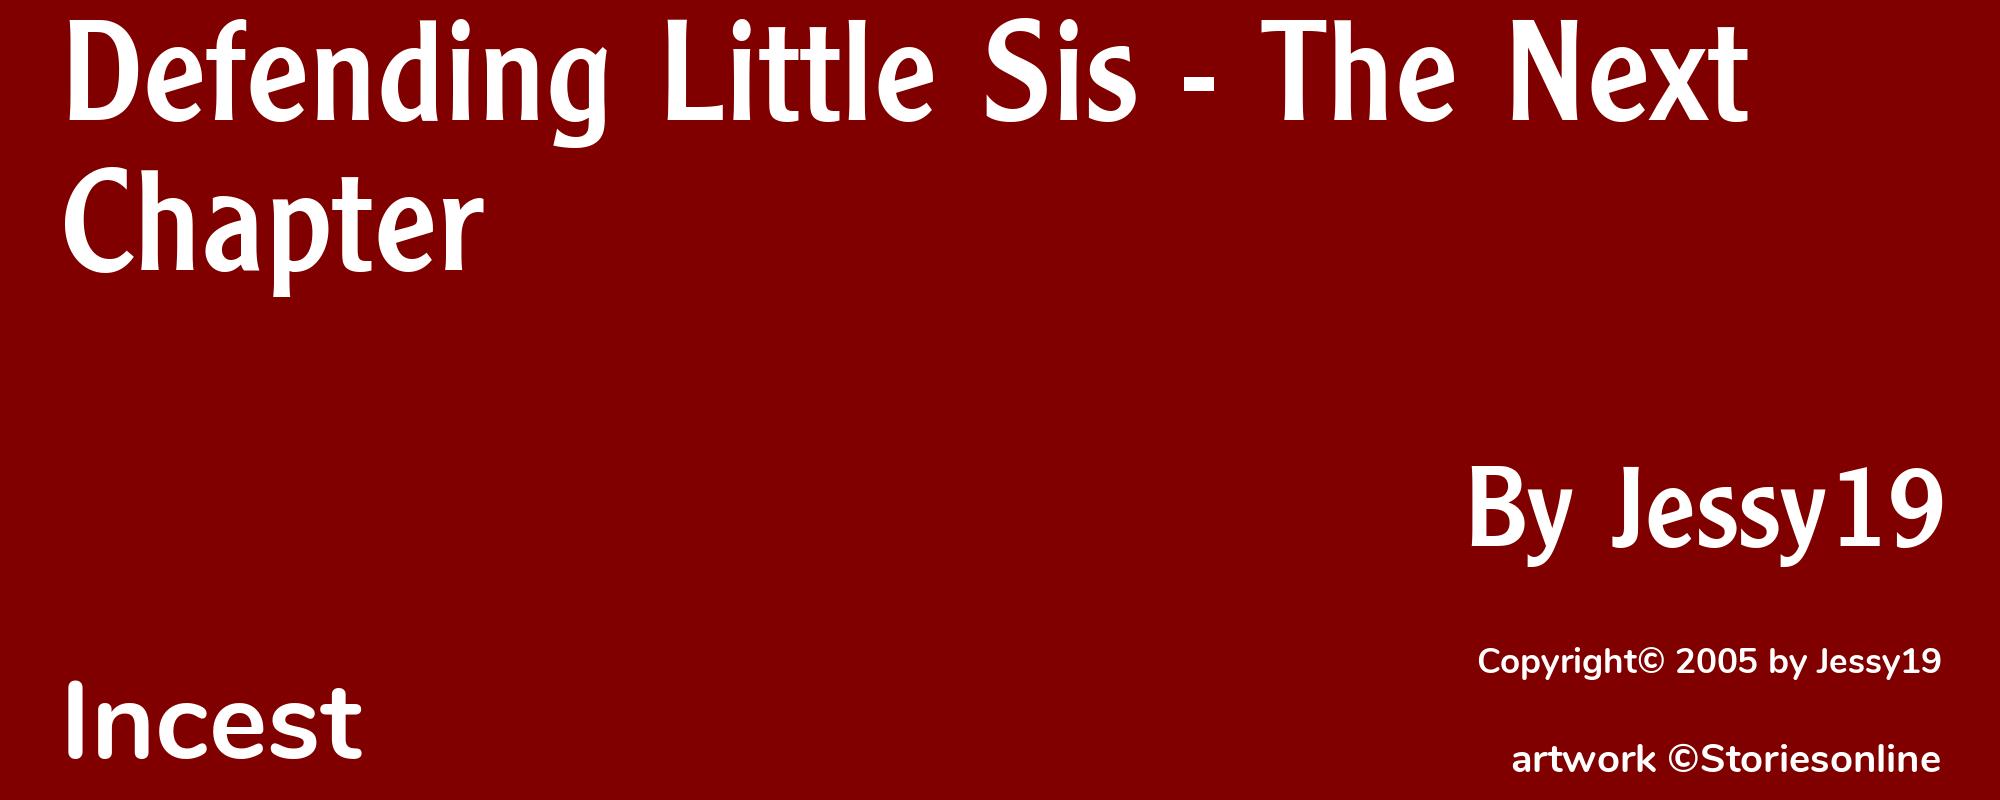 Defending Little Sis - The Next Chapter - Cover